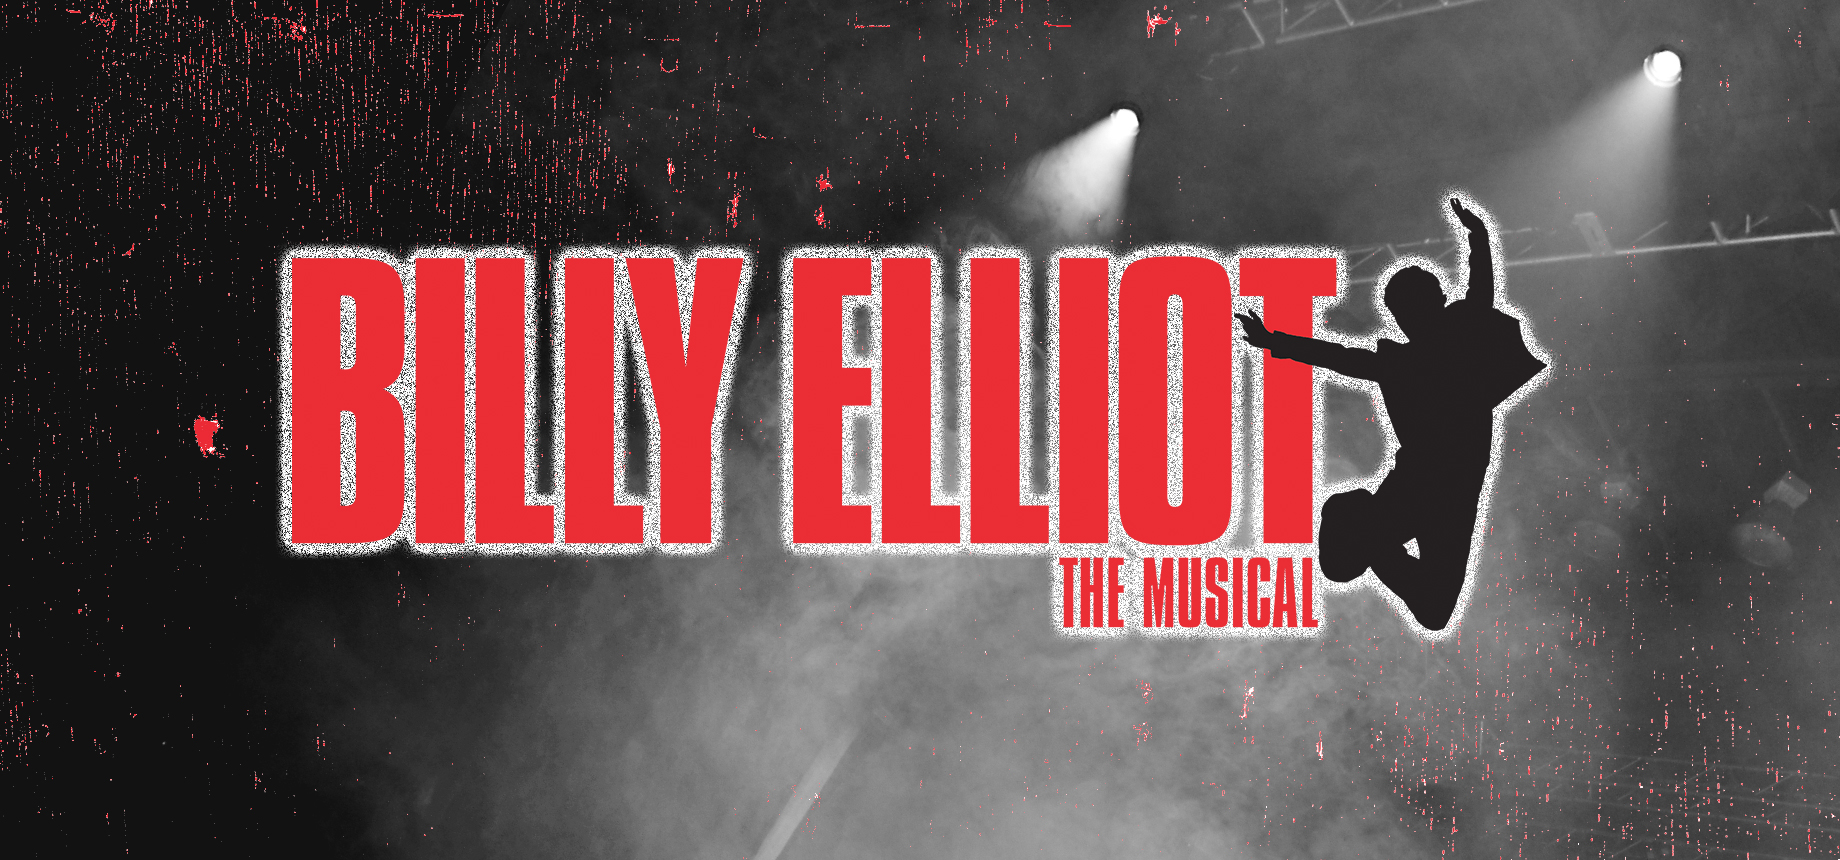 Billy Elliot The Musical | MTI Europe1840 x 860